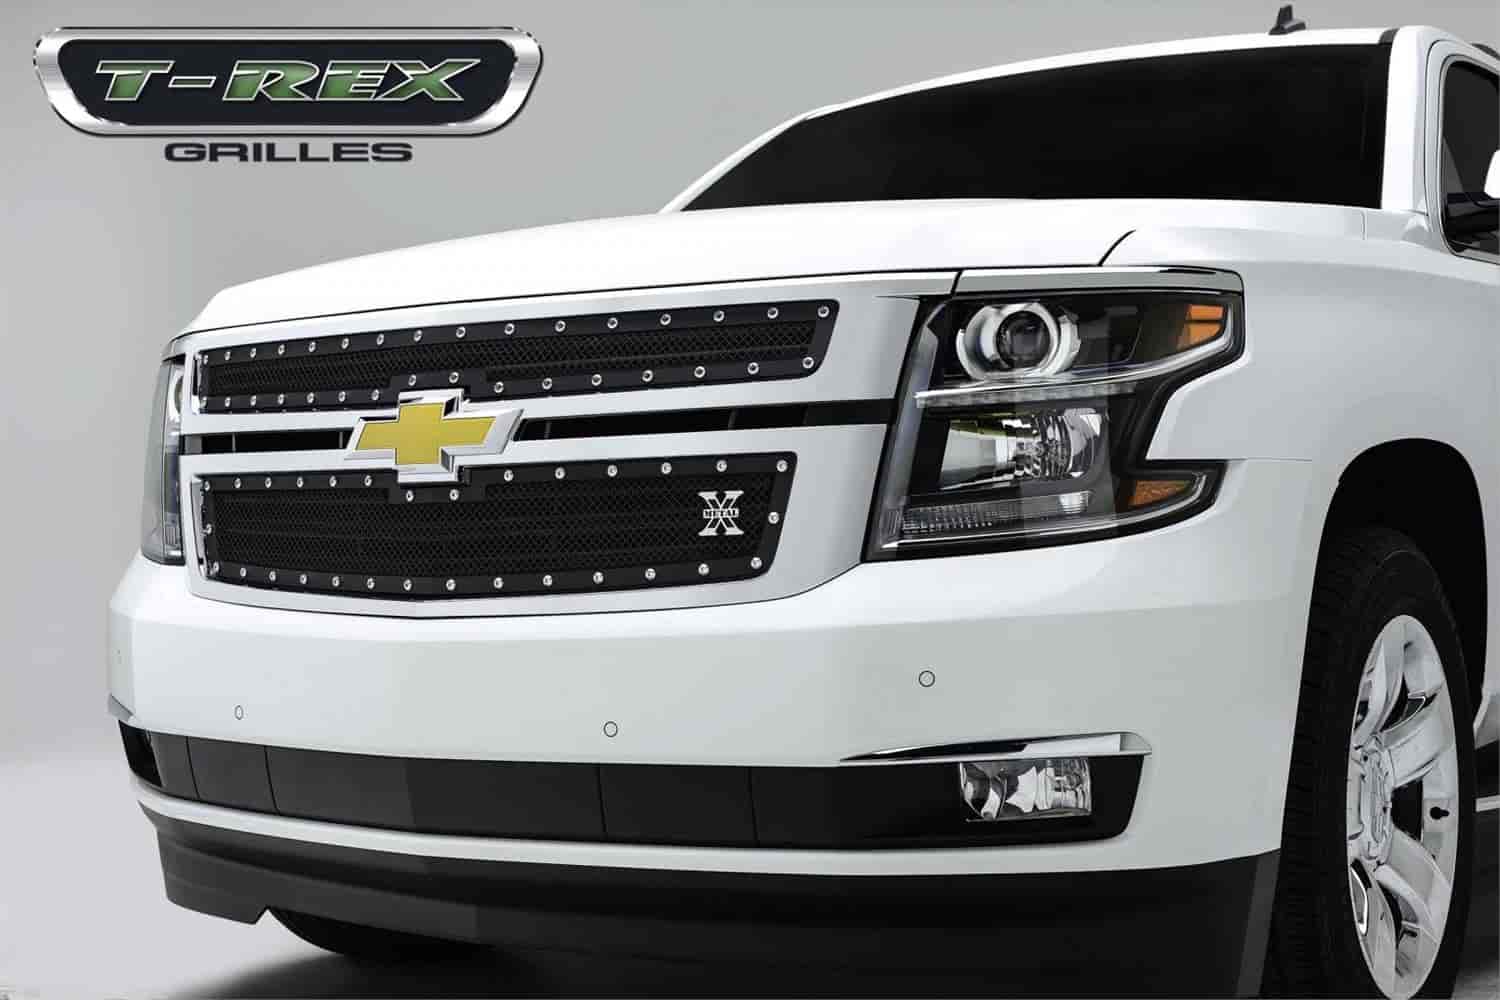 X-METAL Series Studded Main Grille Overlay 2015-2016 Chevrolet